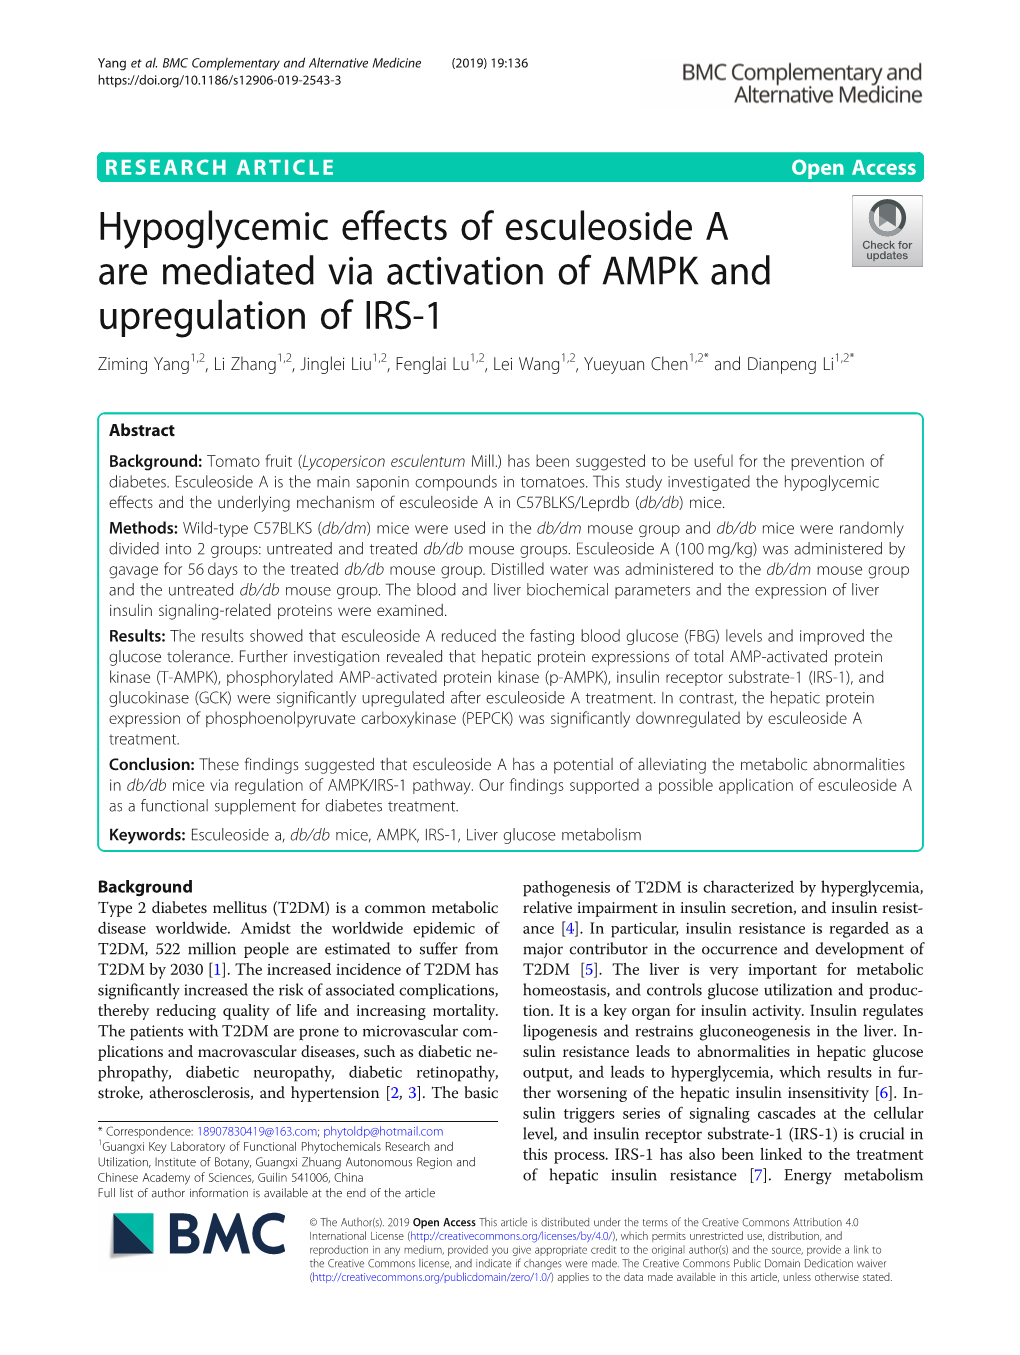 Hypoglycemic Effects of Esculeoside a Are Mediated Via Activation Of